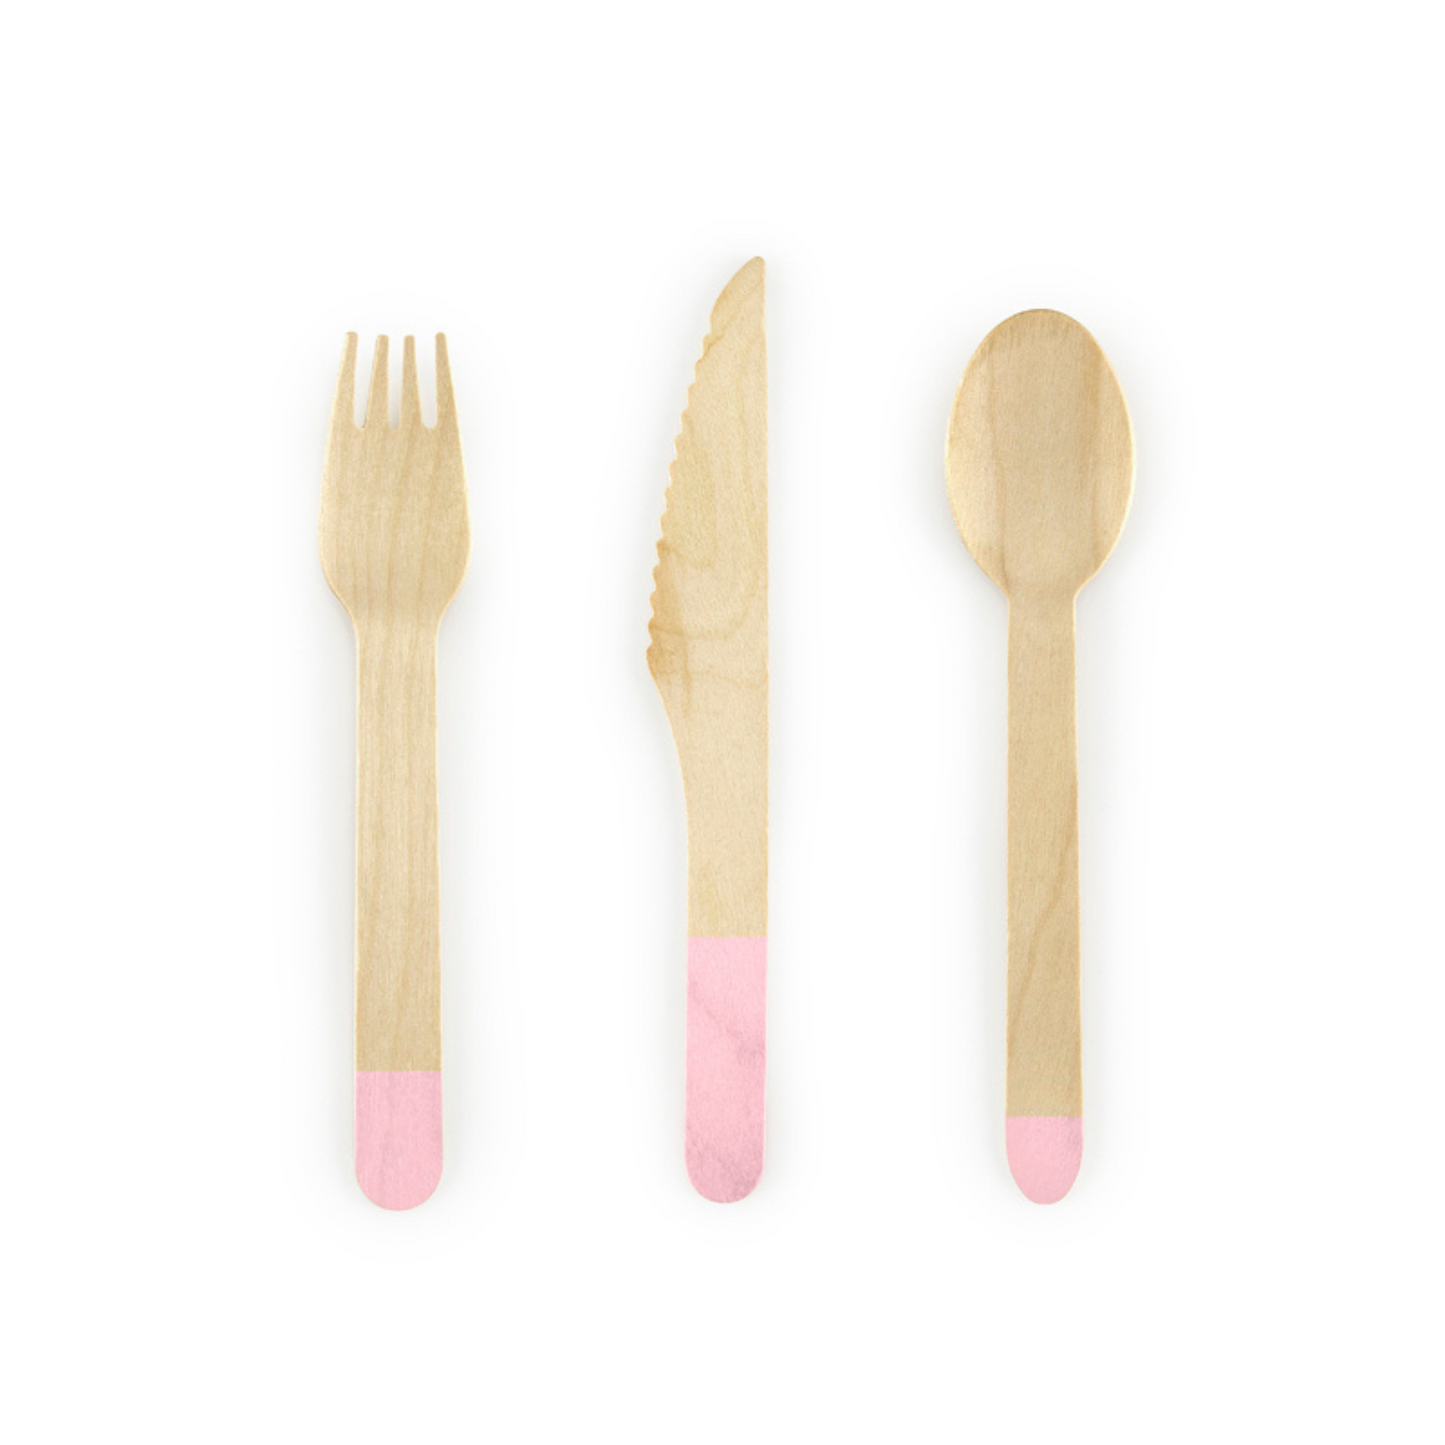 wooden cutlery with pink dipped ends